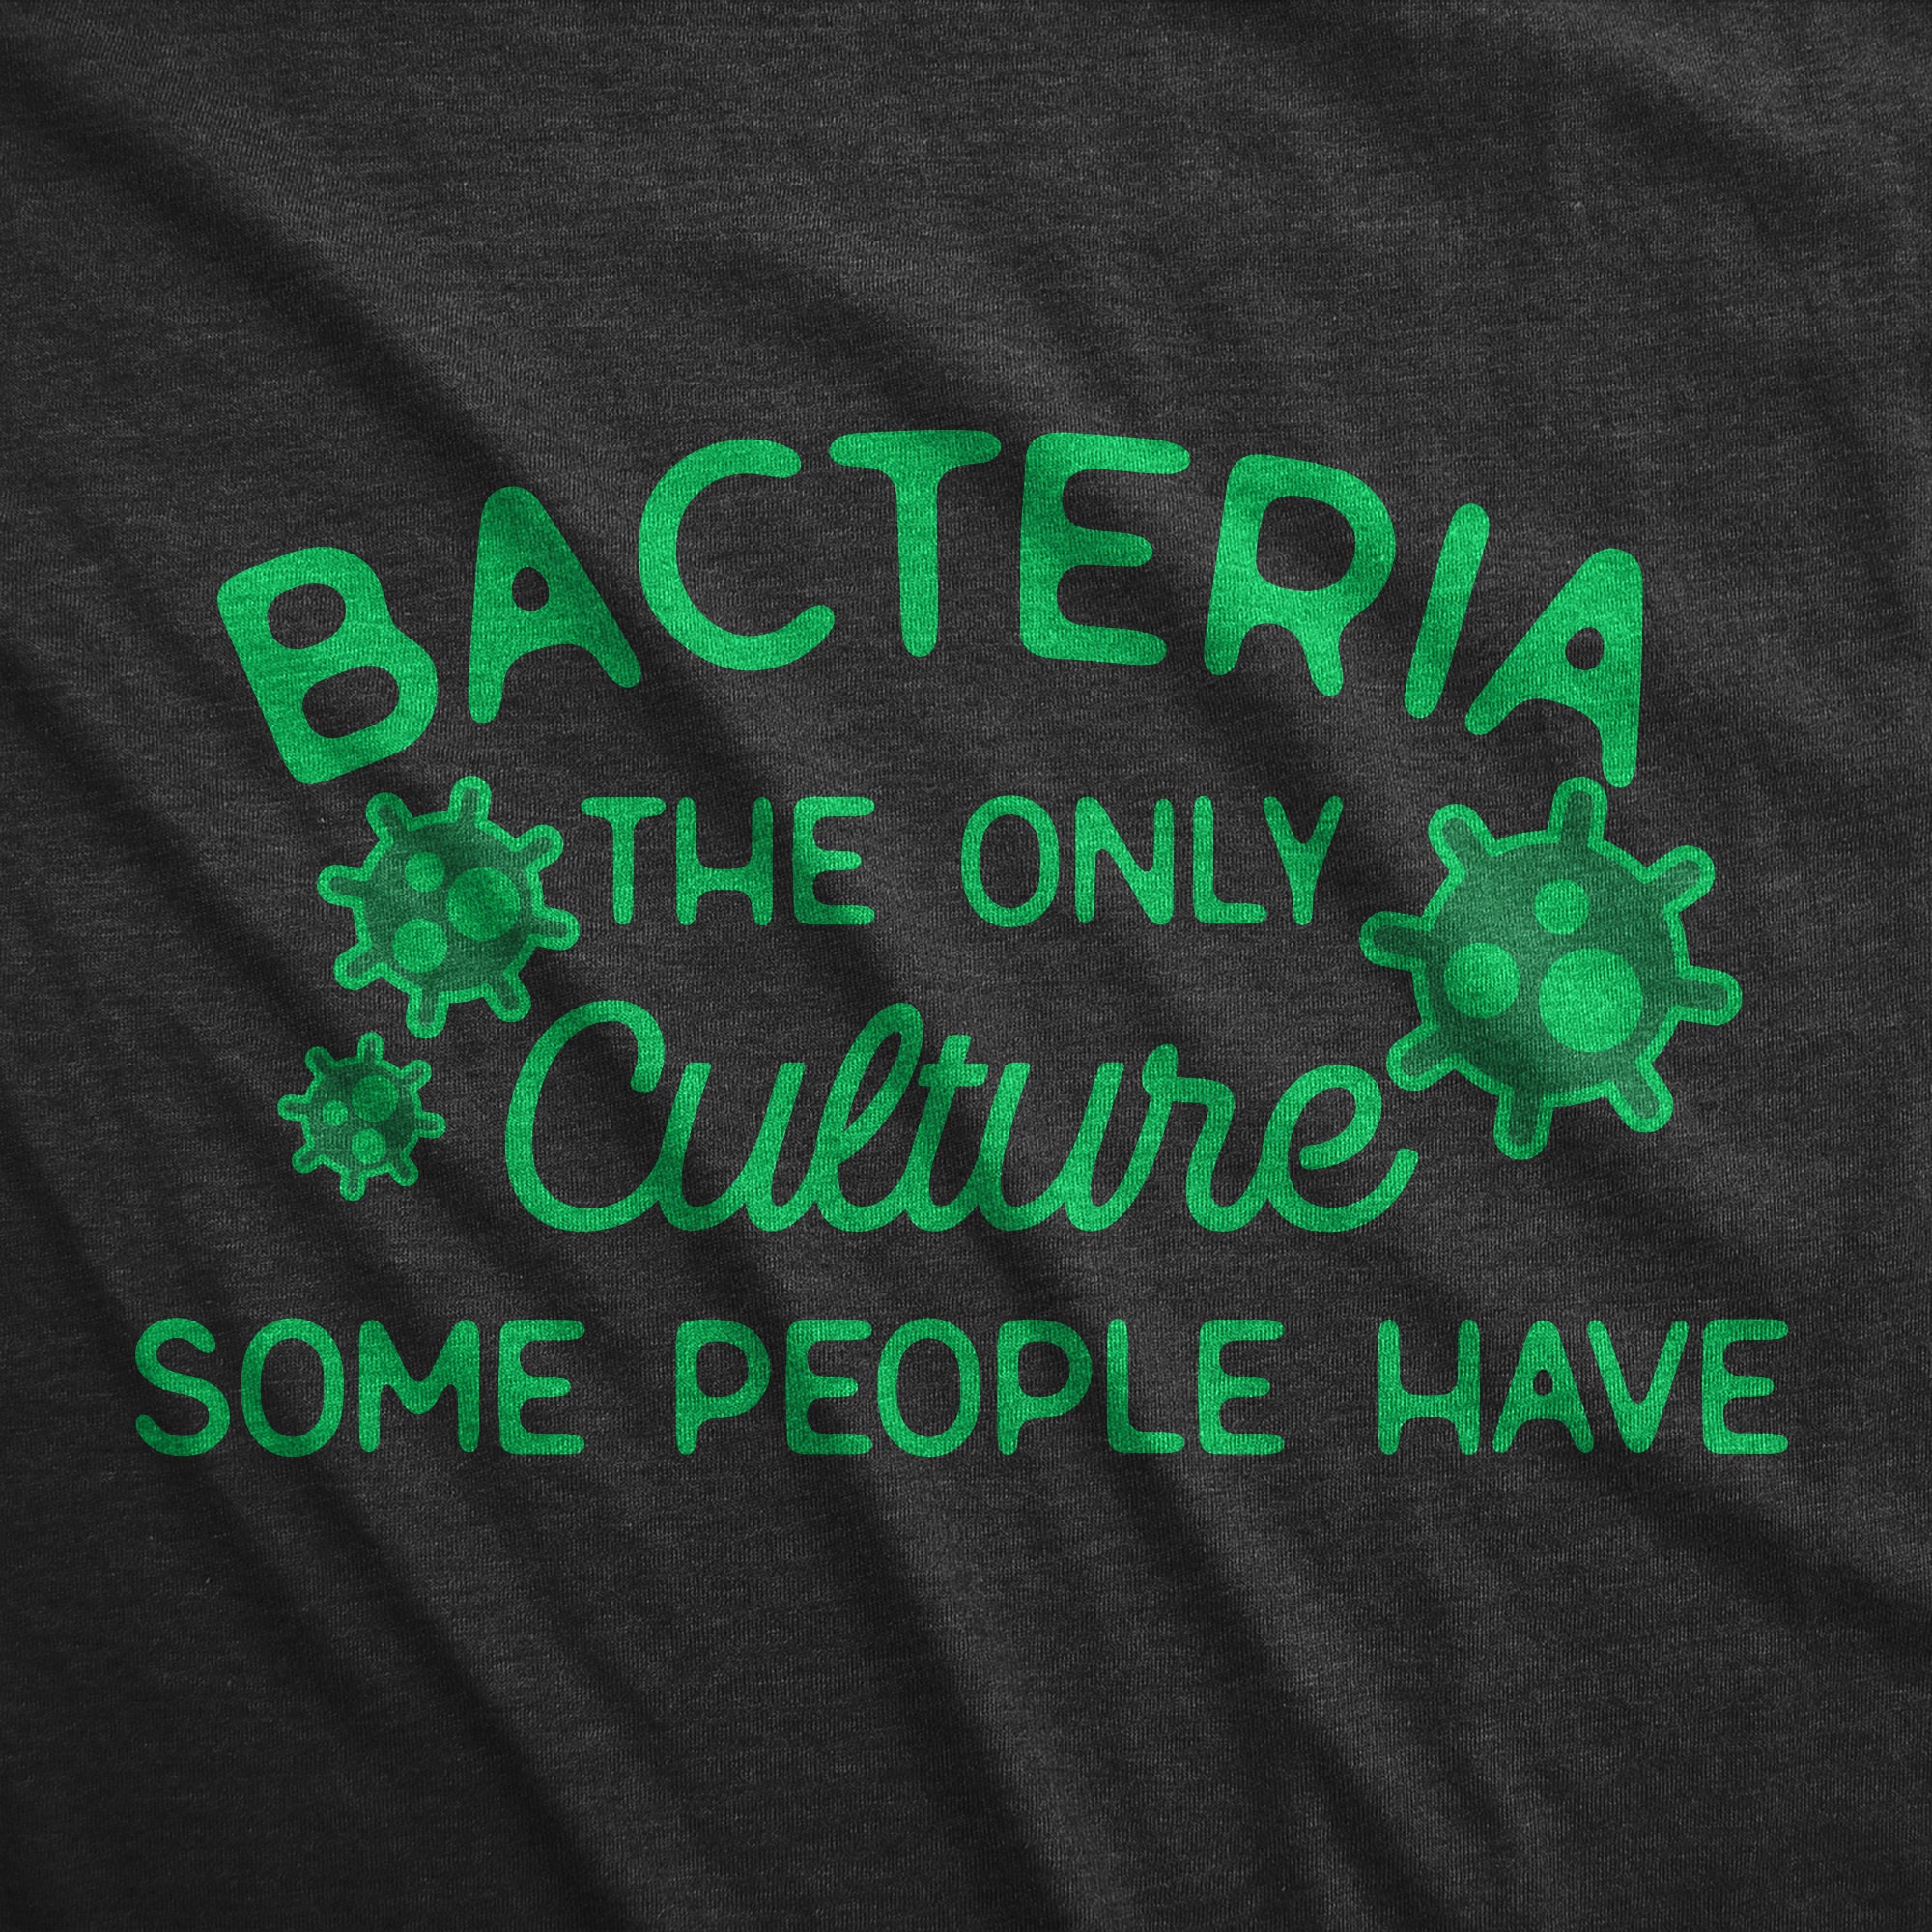 Funny Heather Black - BACTERIA Bacteria The Only Culture Some People Have Mens T Shirt Nerdy Sarcastic Tee